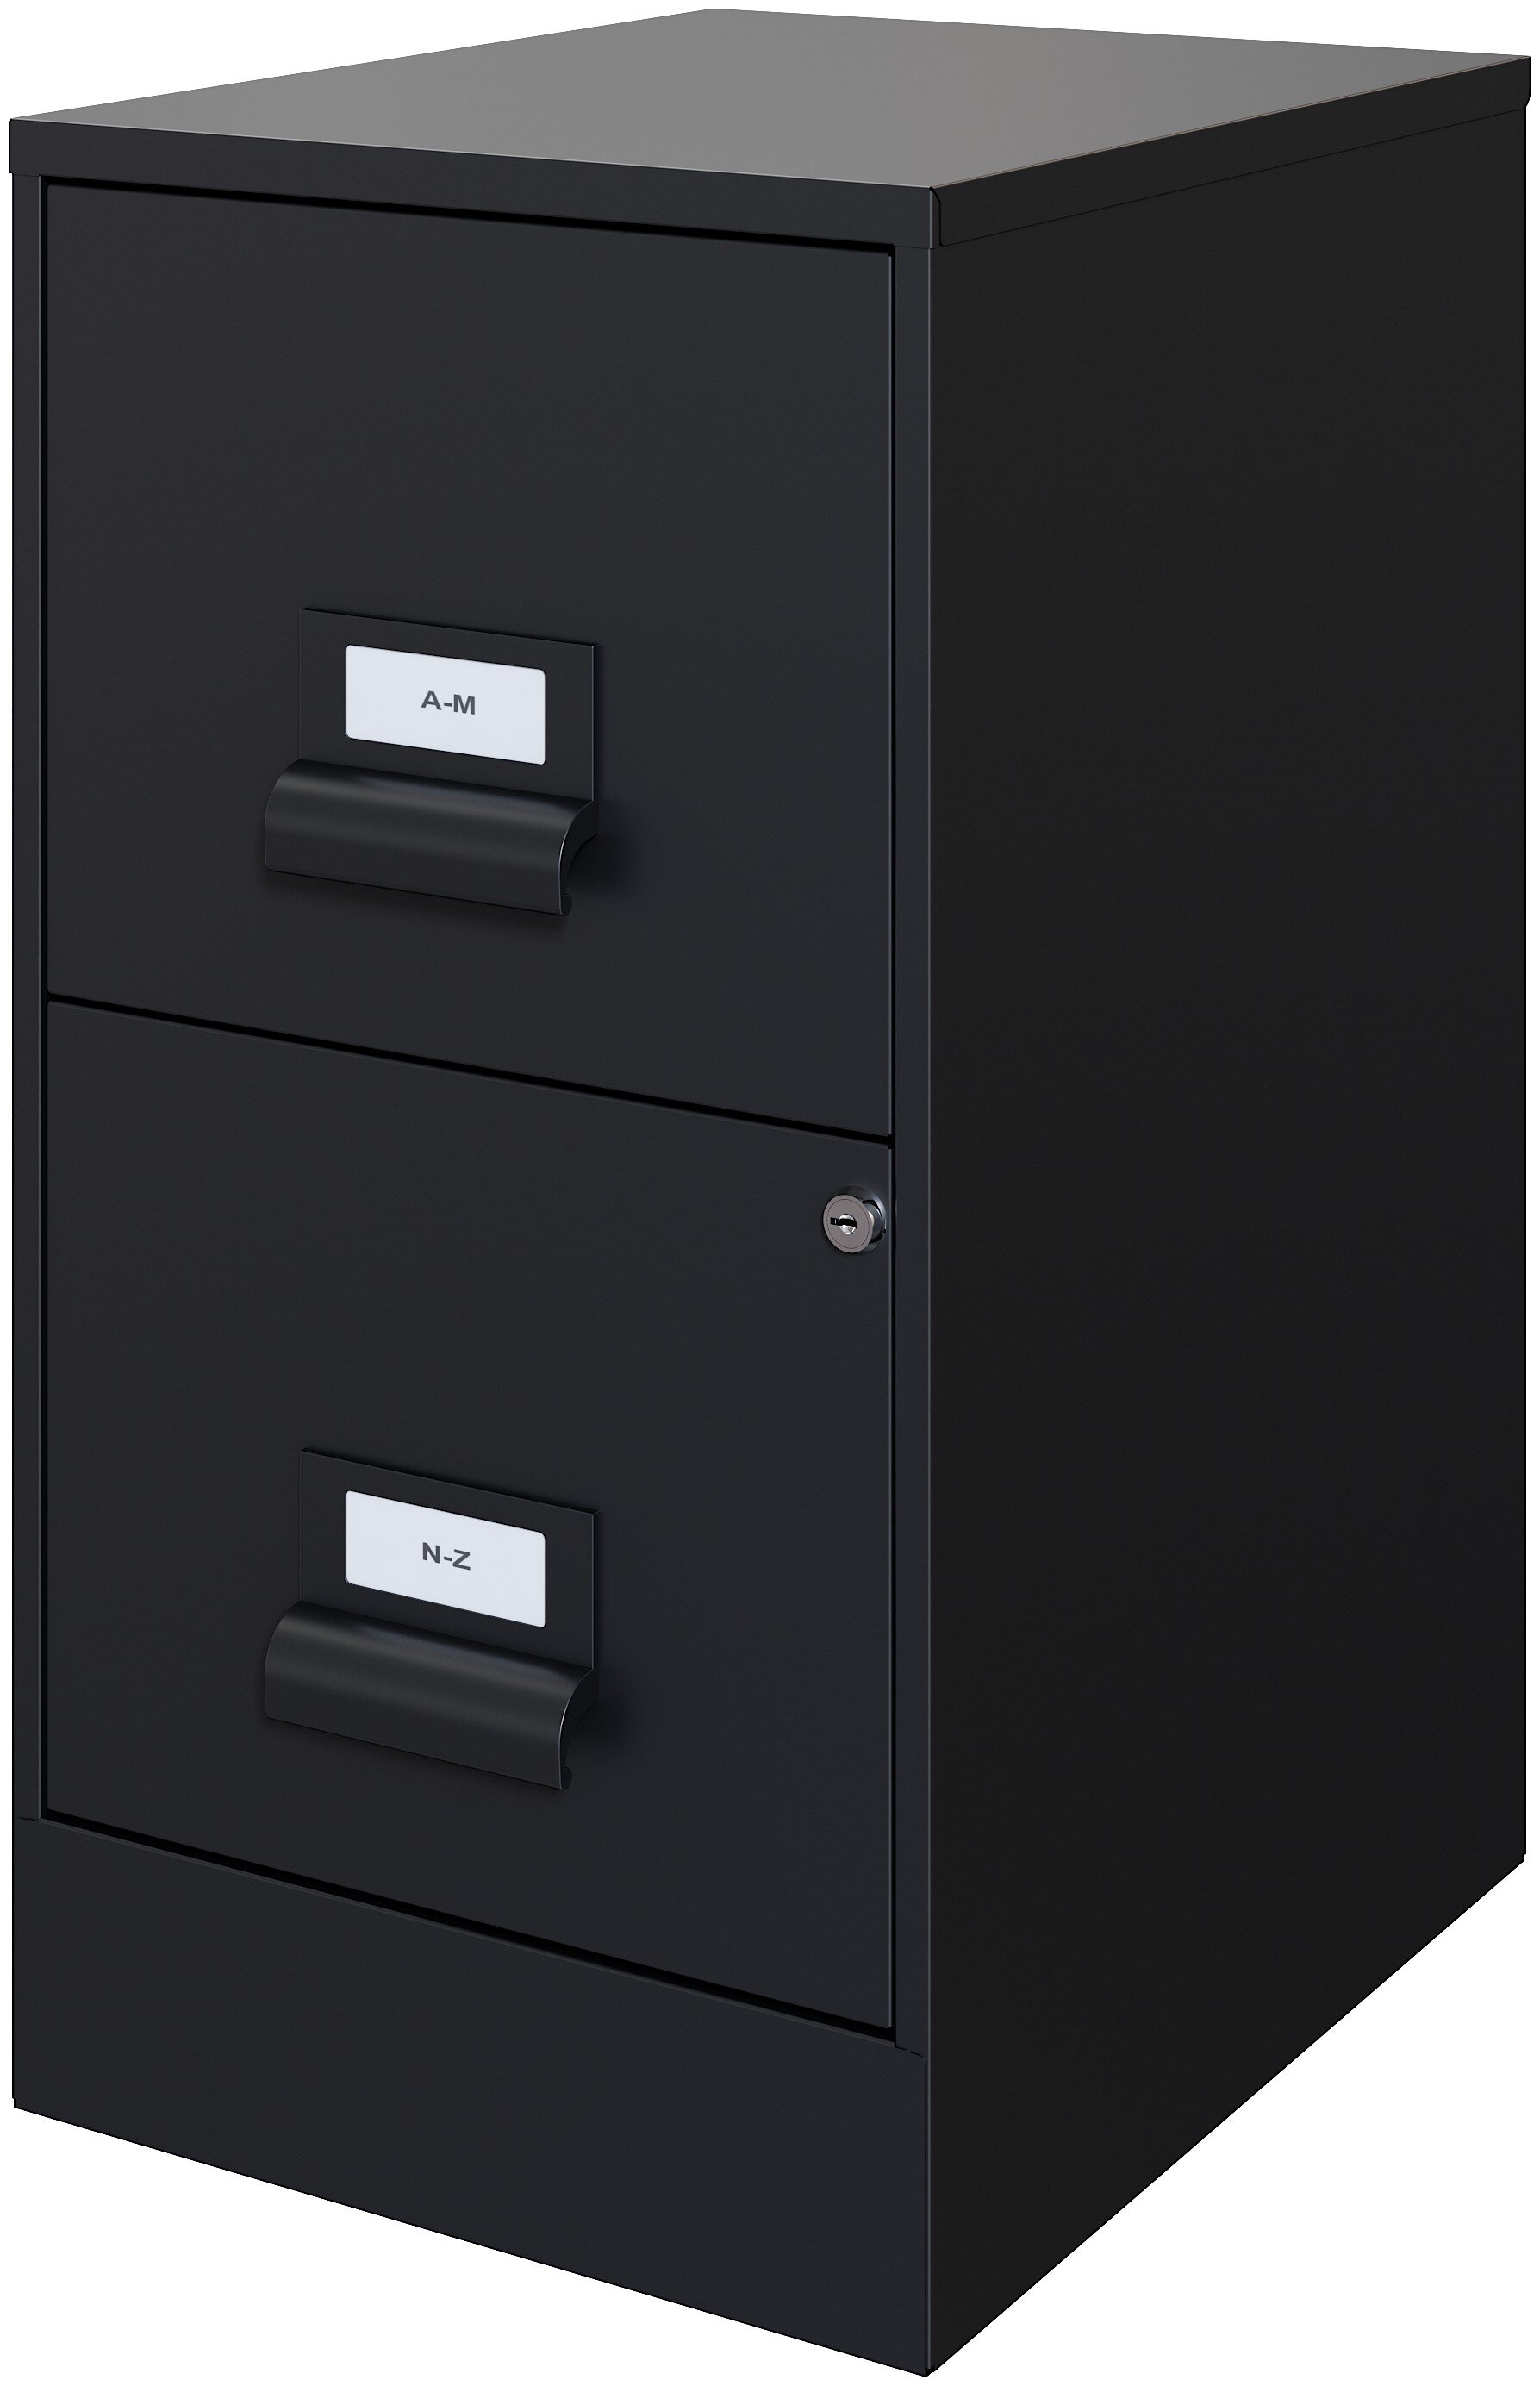 Vertical File Cabinets for Home Office with Lock and 2 Drawers, Office Organization and Storage Latitude Run Color: Black